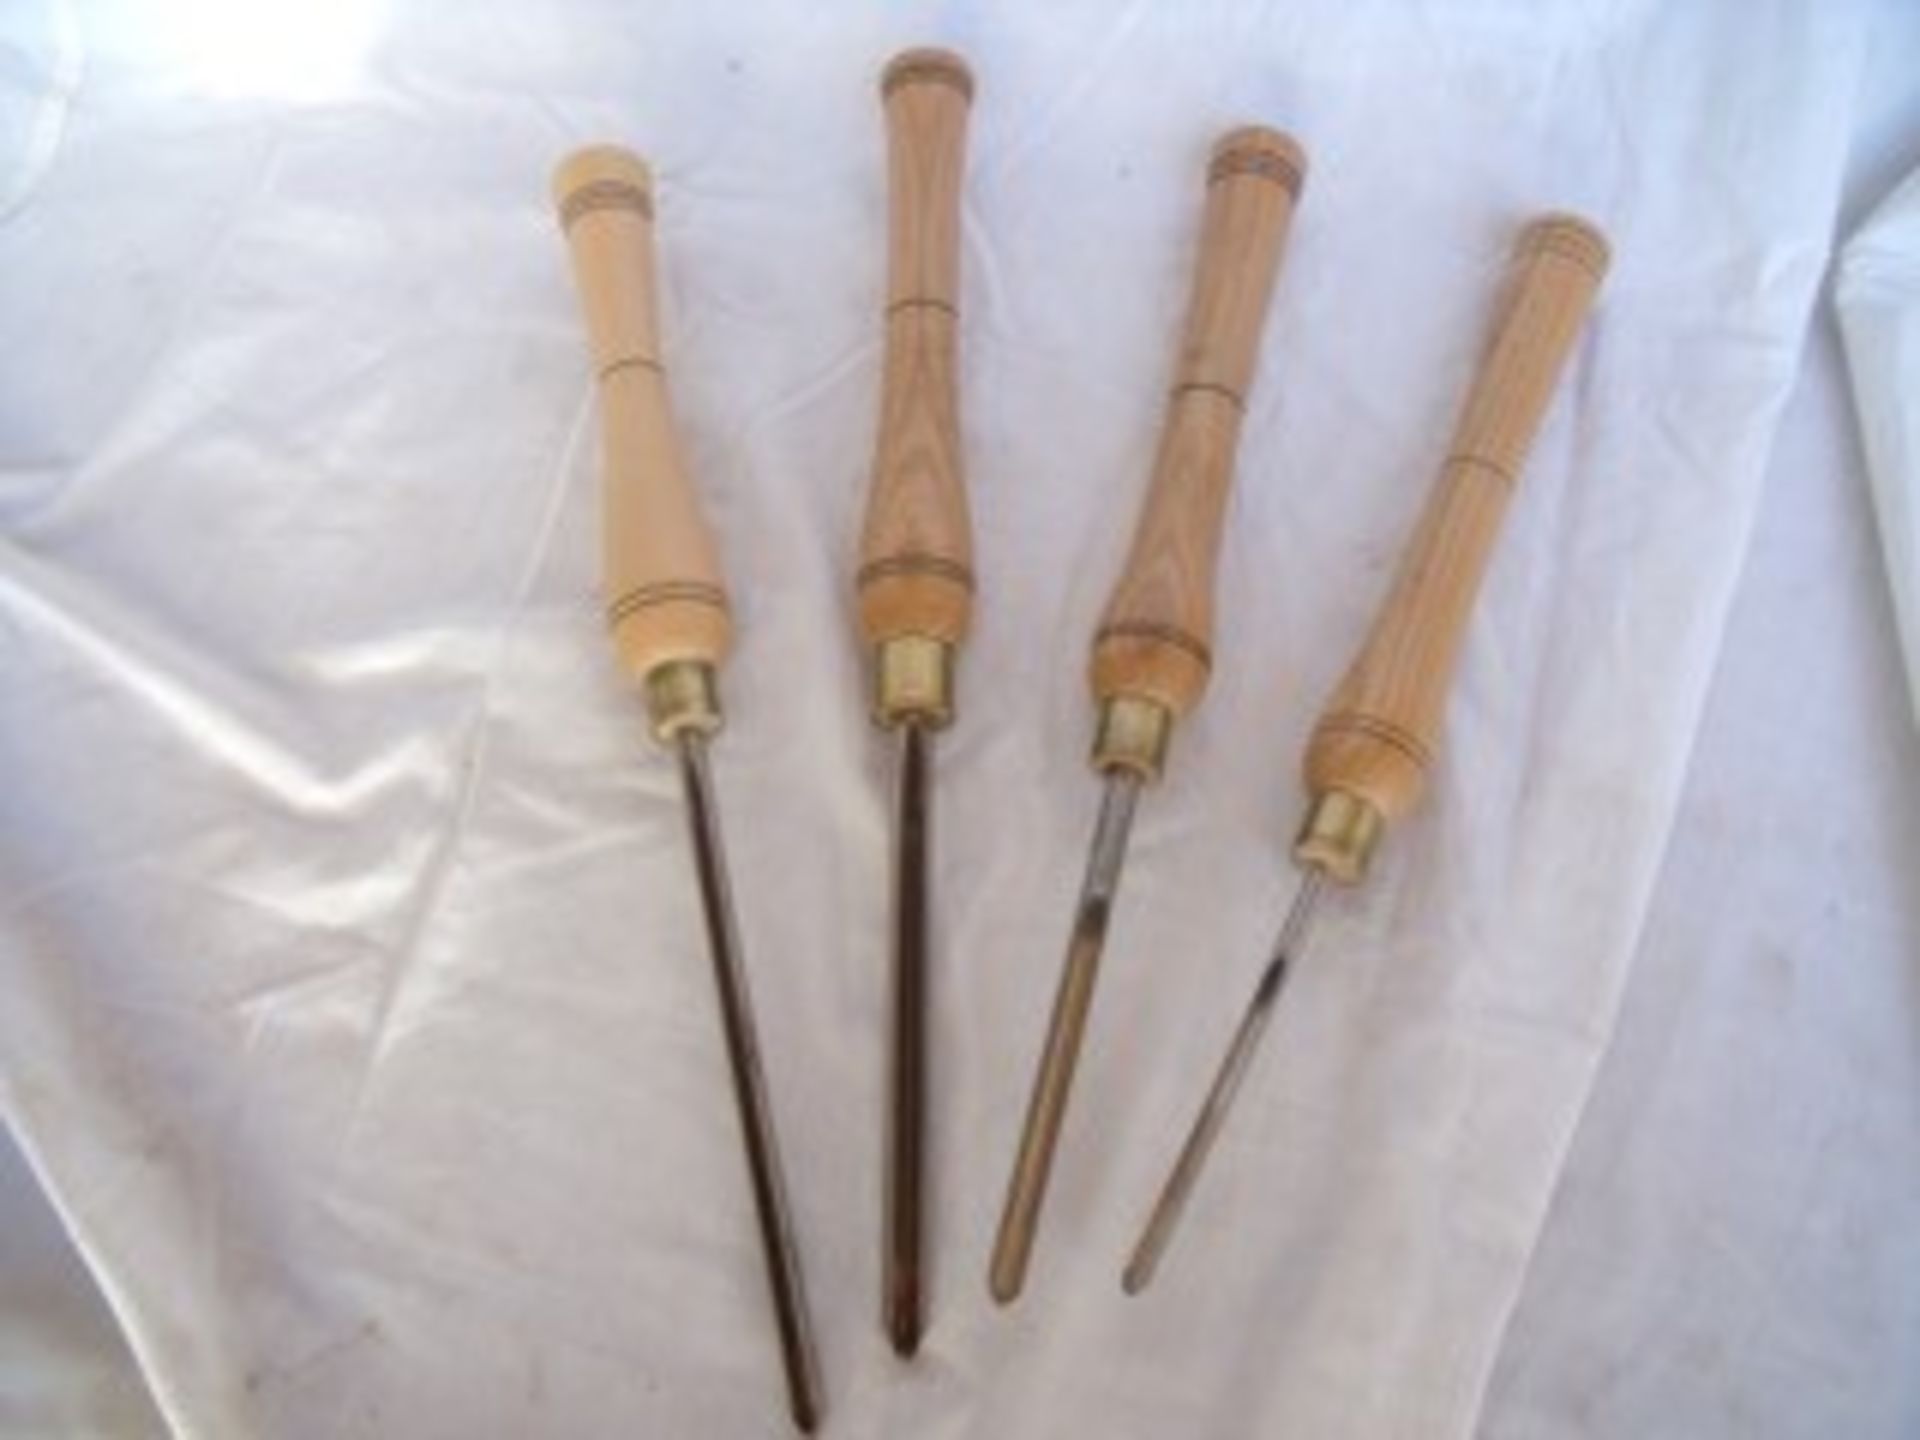 Selection of 15 Wood Turning Cutting Tools By Robert Sorby And Ashley Isles